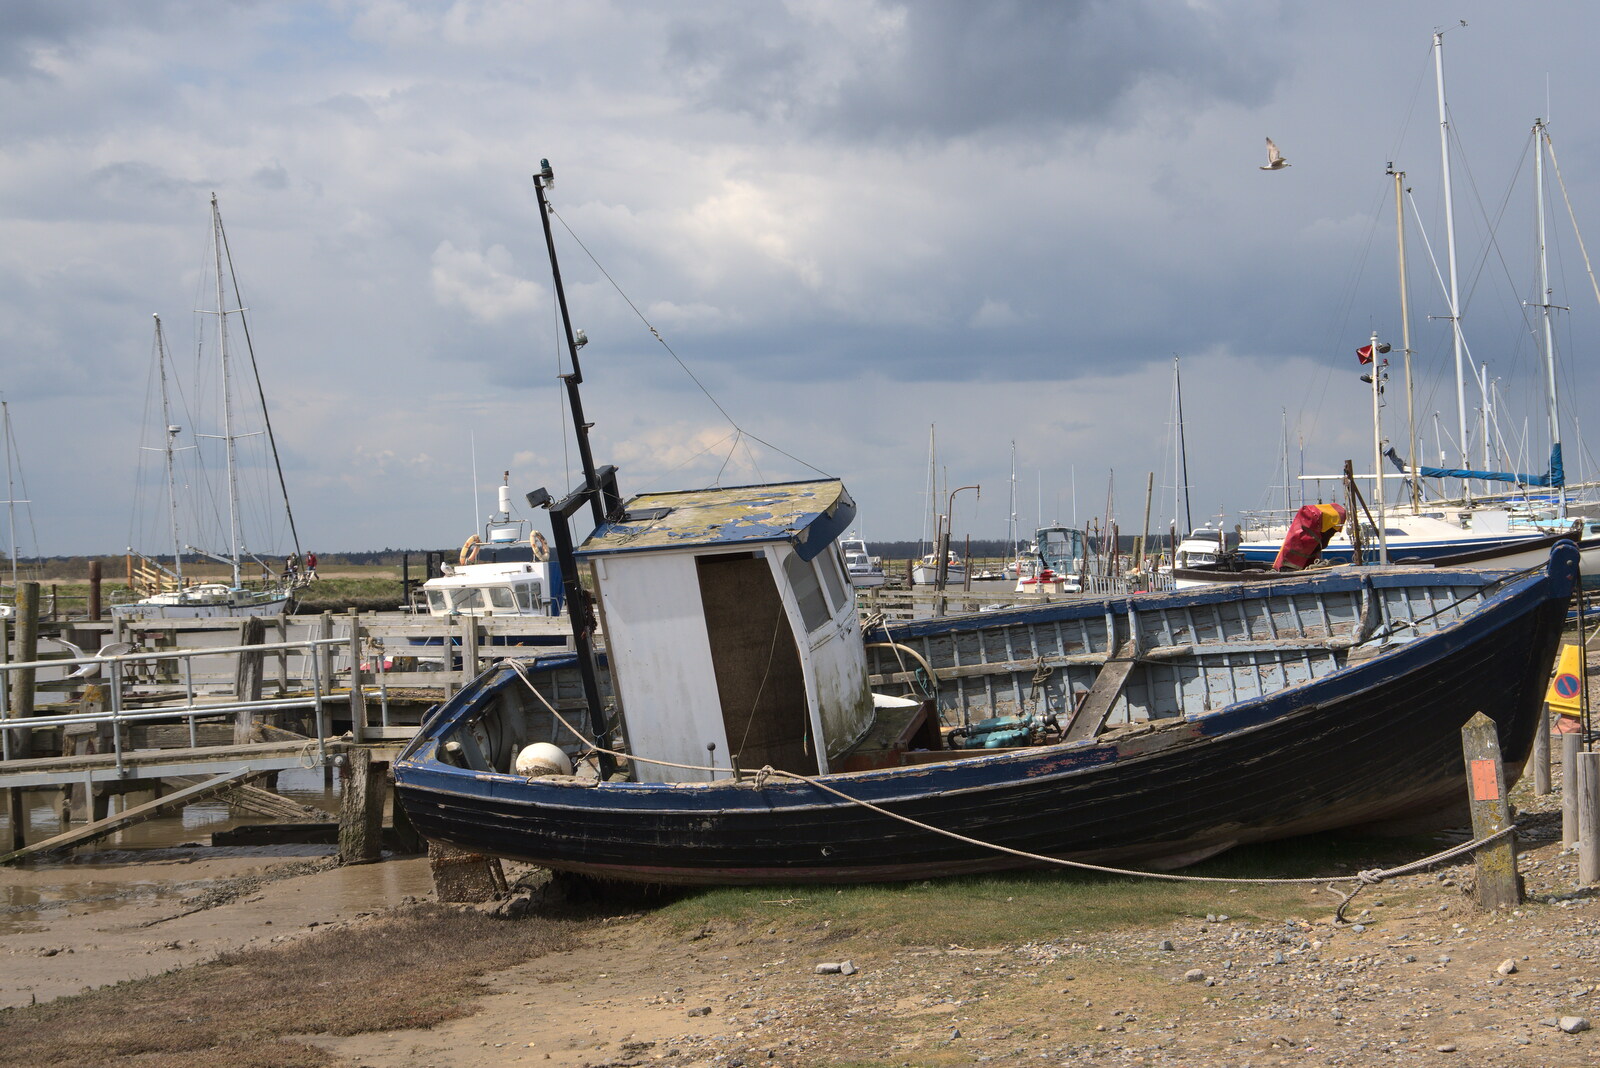 A derelict fishing boat from A Chilly Trip to the Beach, Southwold Harbour, Suffolk - 2nd May 2021